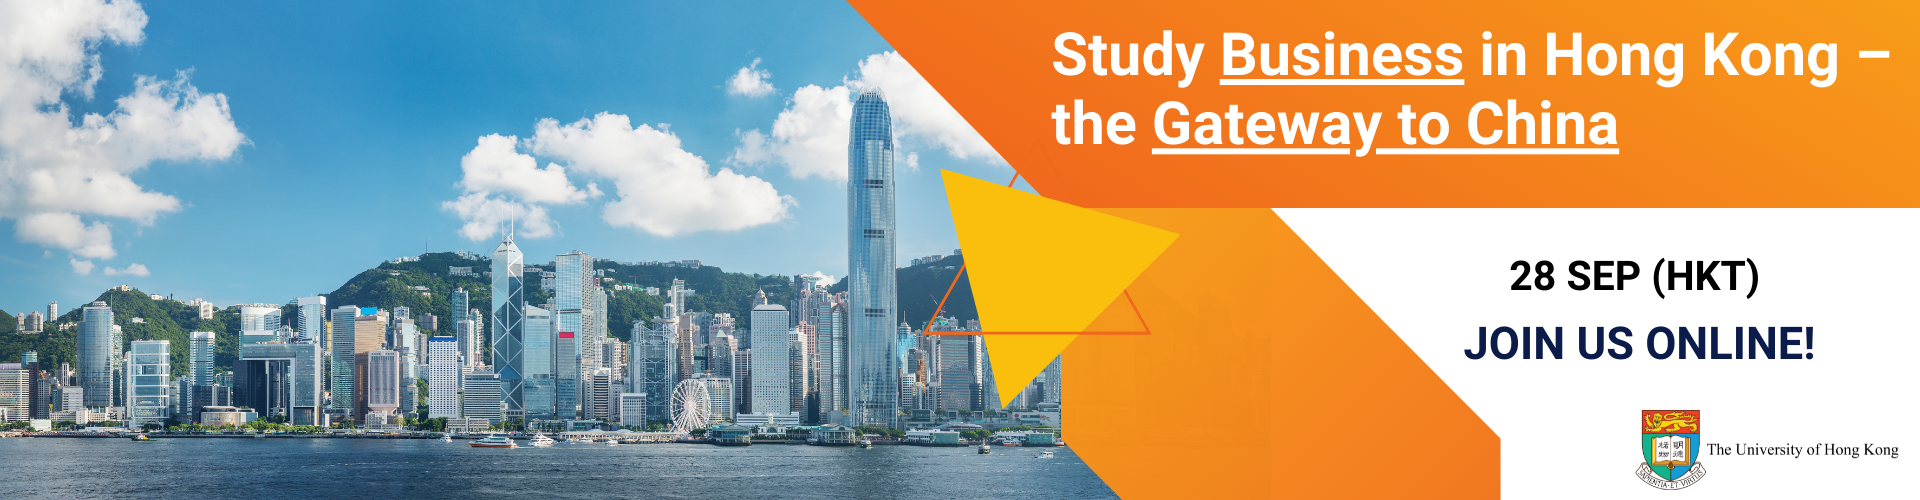 Animated text "Study Business in Hong Kong - the Gateway to China Join Us On 28 September" with photos of Hong Kong harbour